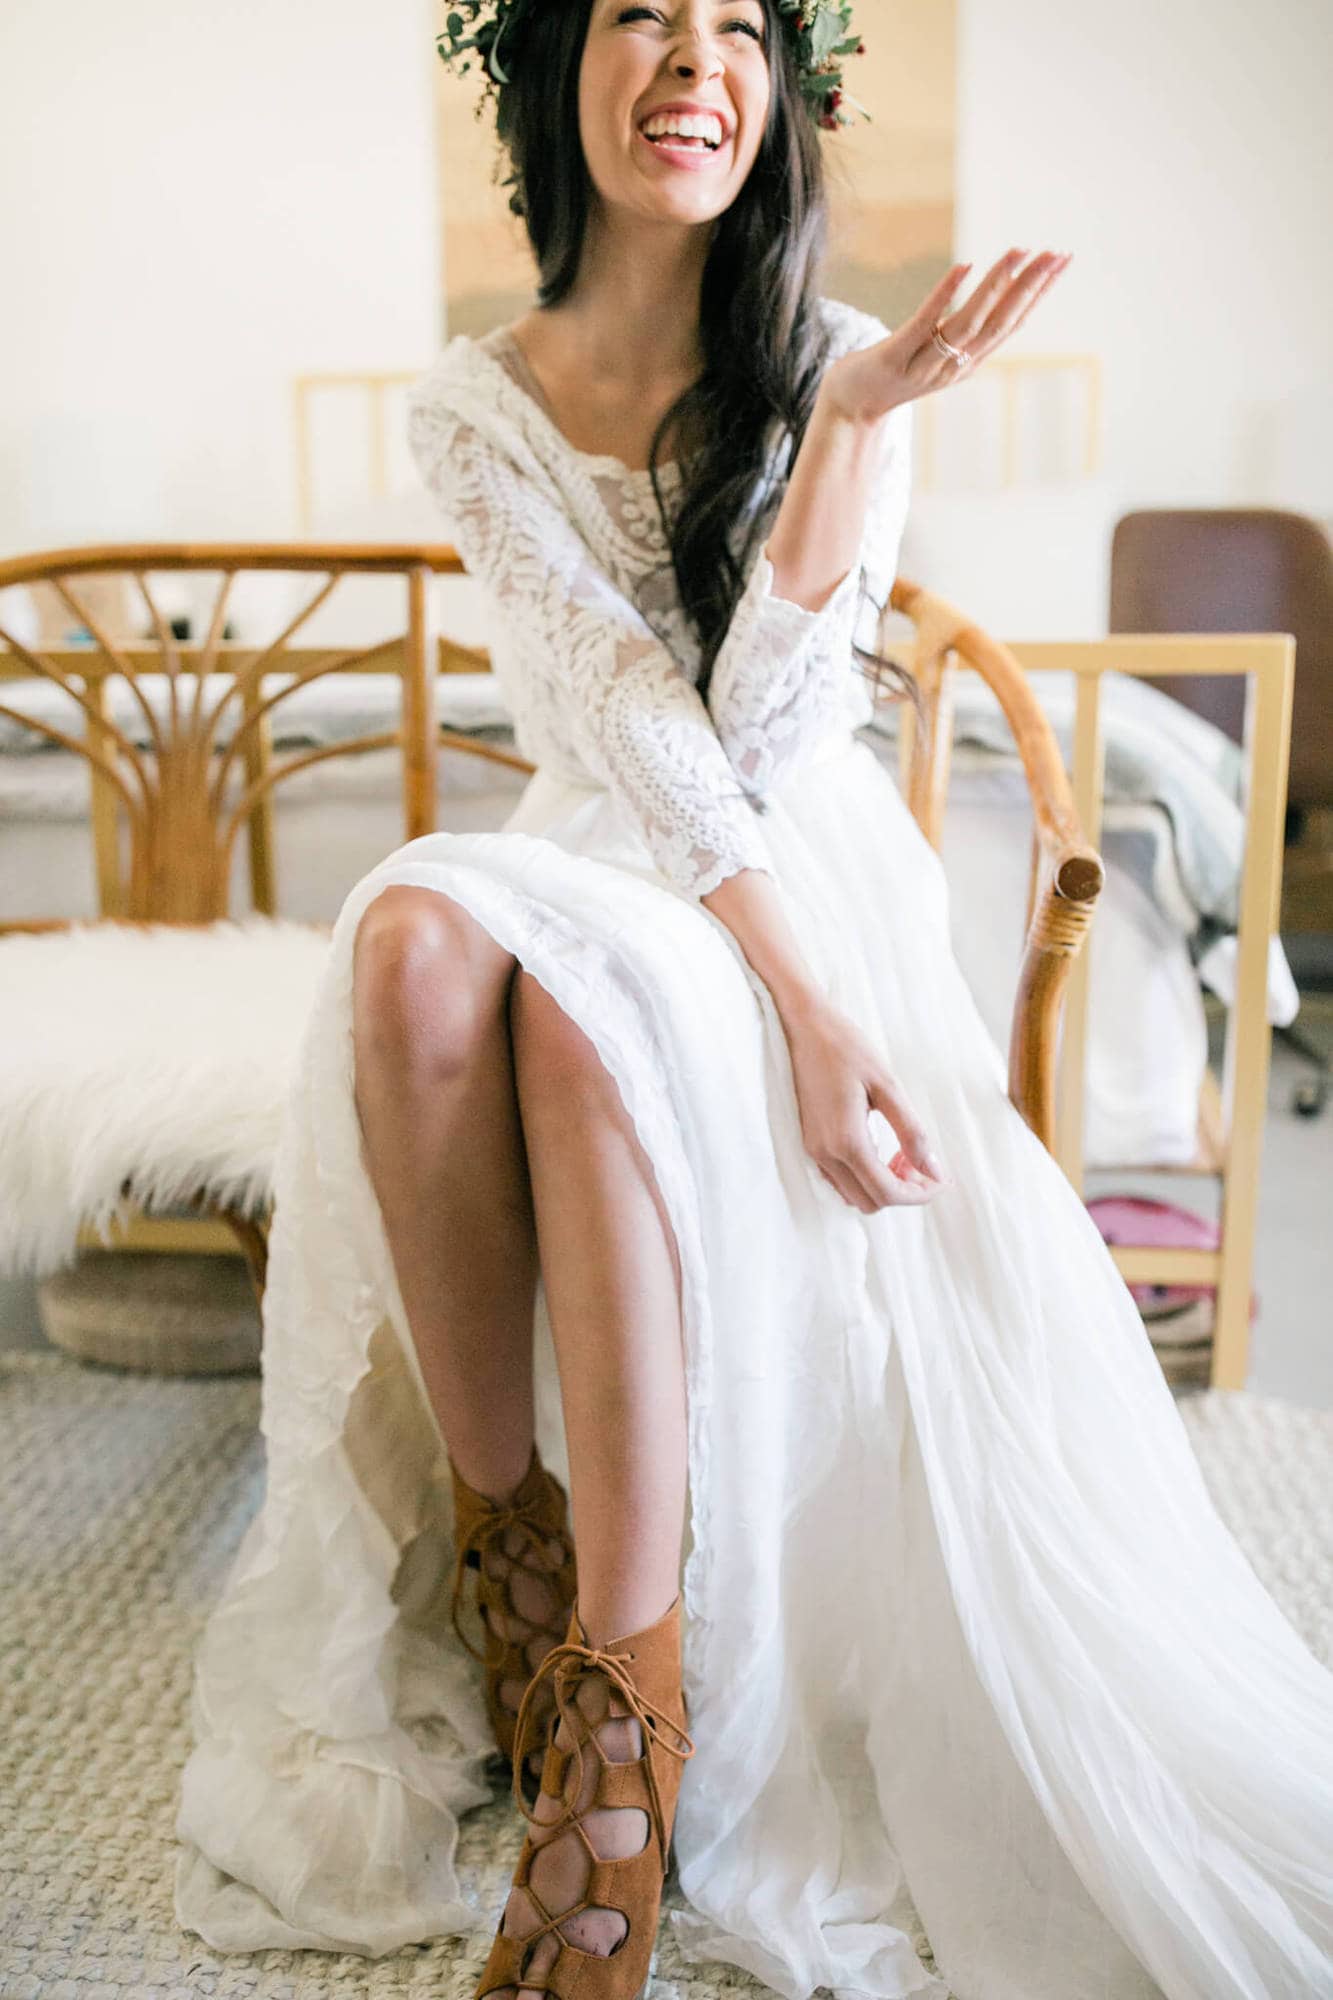 In her wedding dress, the bride sits on a bench in front of her hotel bed and laughs.